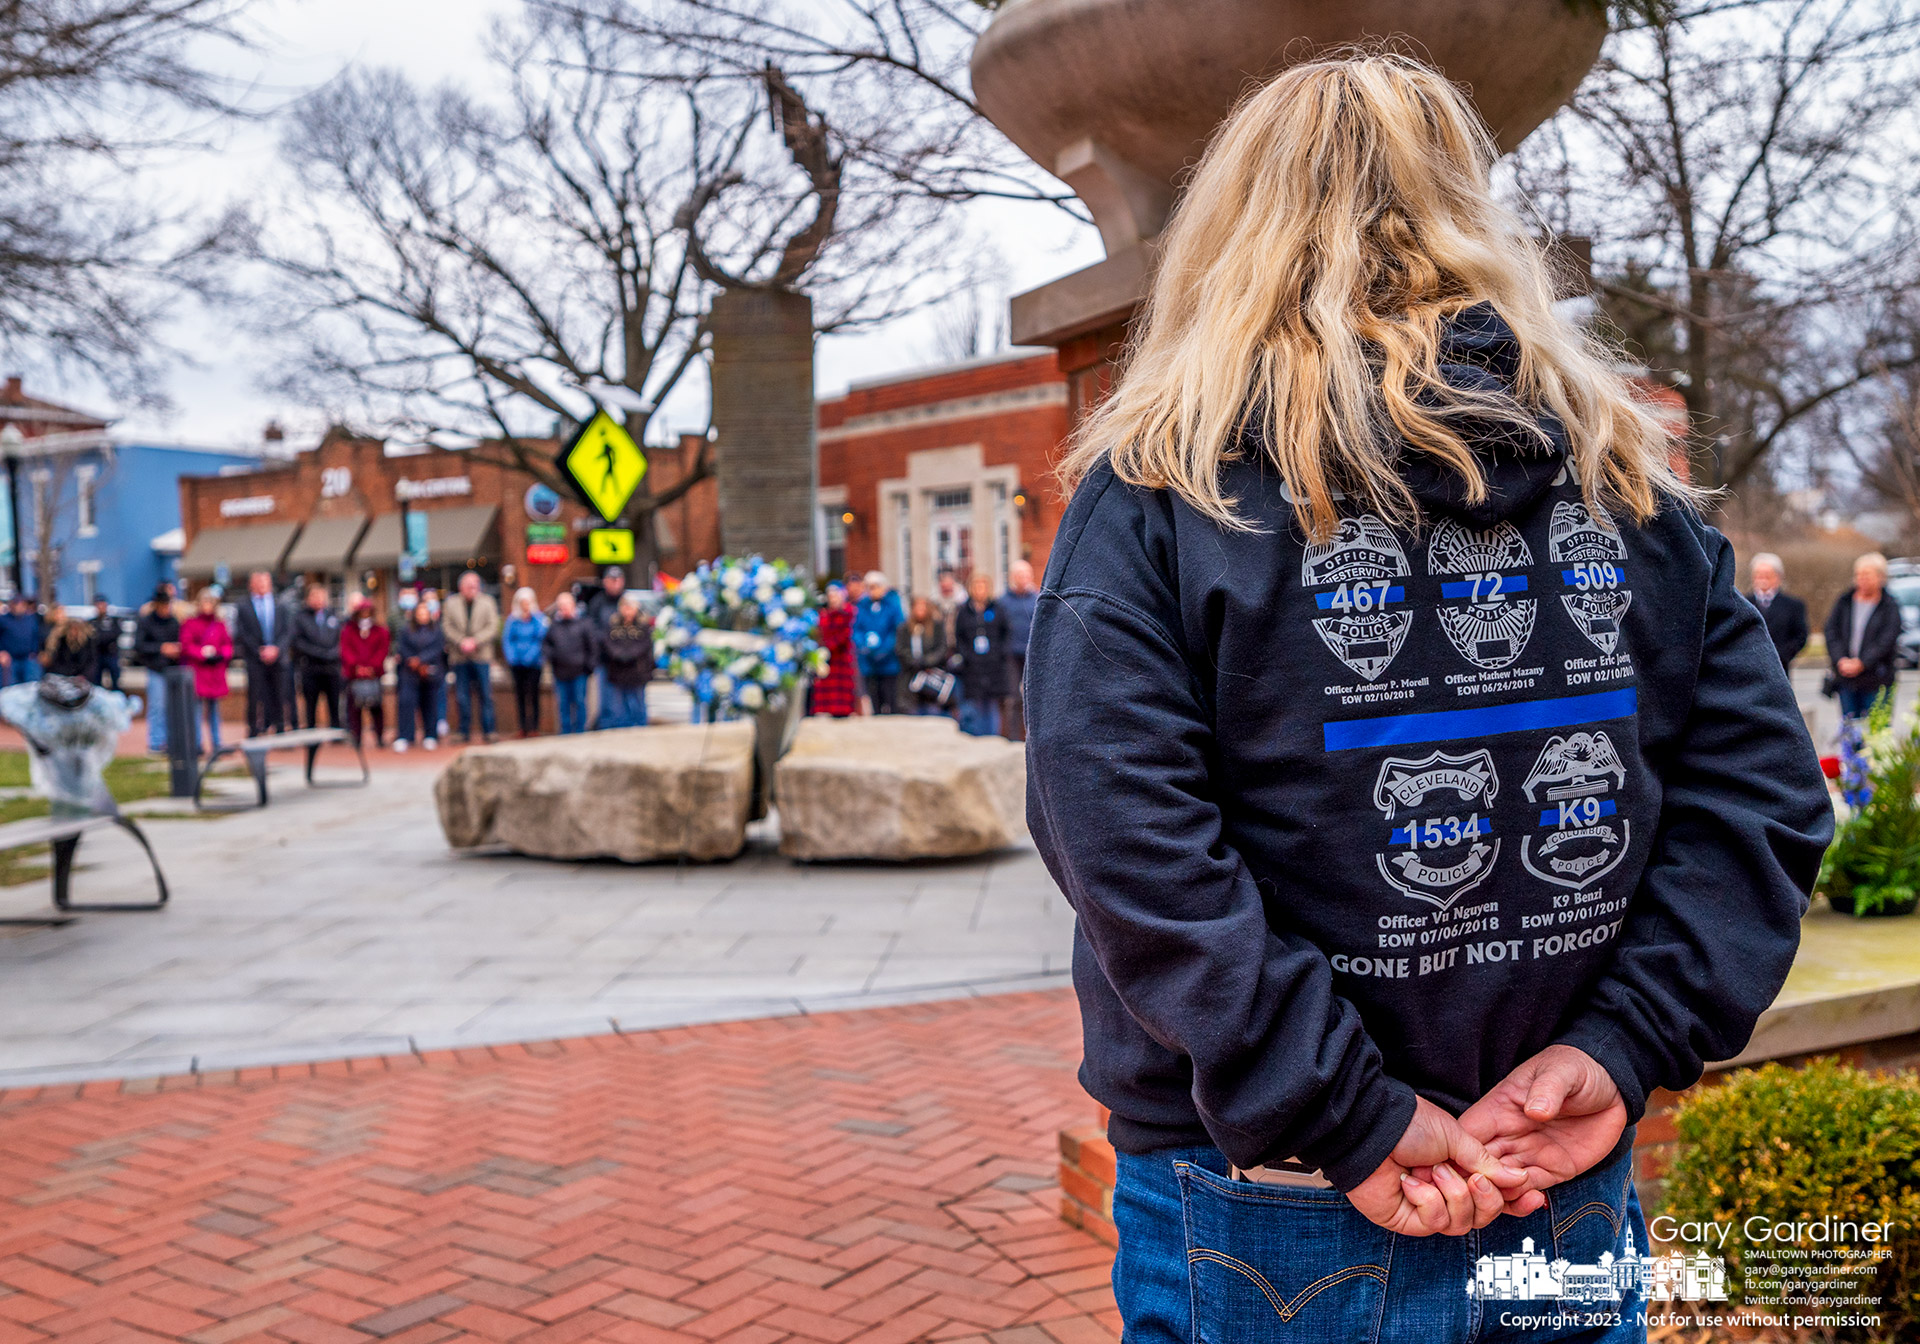 A woman wears a jacket bearing patches marking the names of police officers killed in the line of duty including Westerville officers Moretti and Joering at a wreath-laying ceremony at city hall on the fifth anniversary of their deaths. My Final Photo for February 10, 2023.